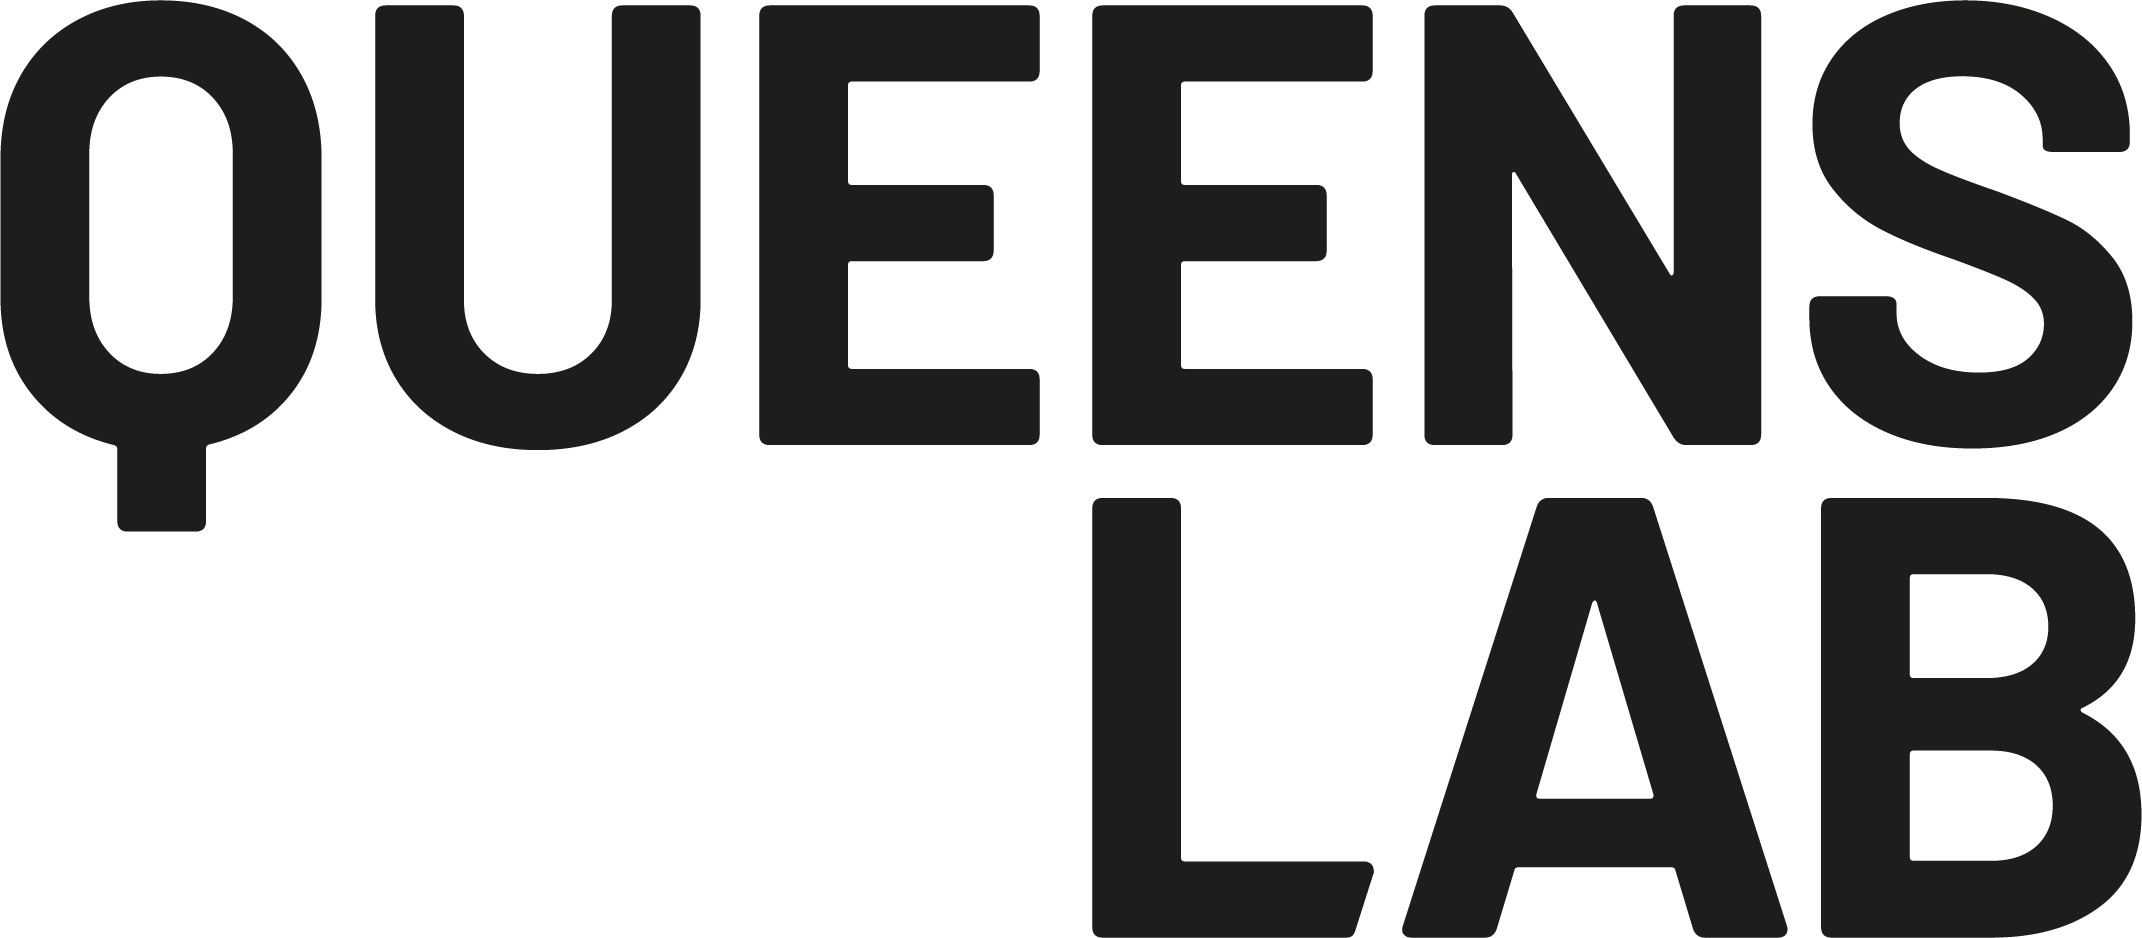 Company logo for QueensLab